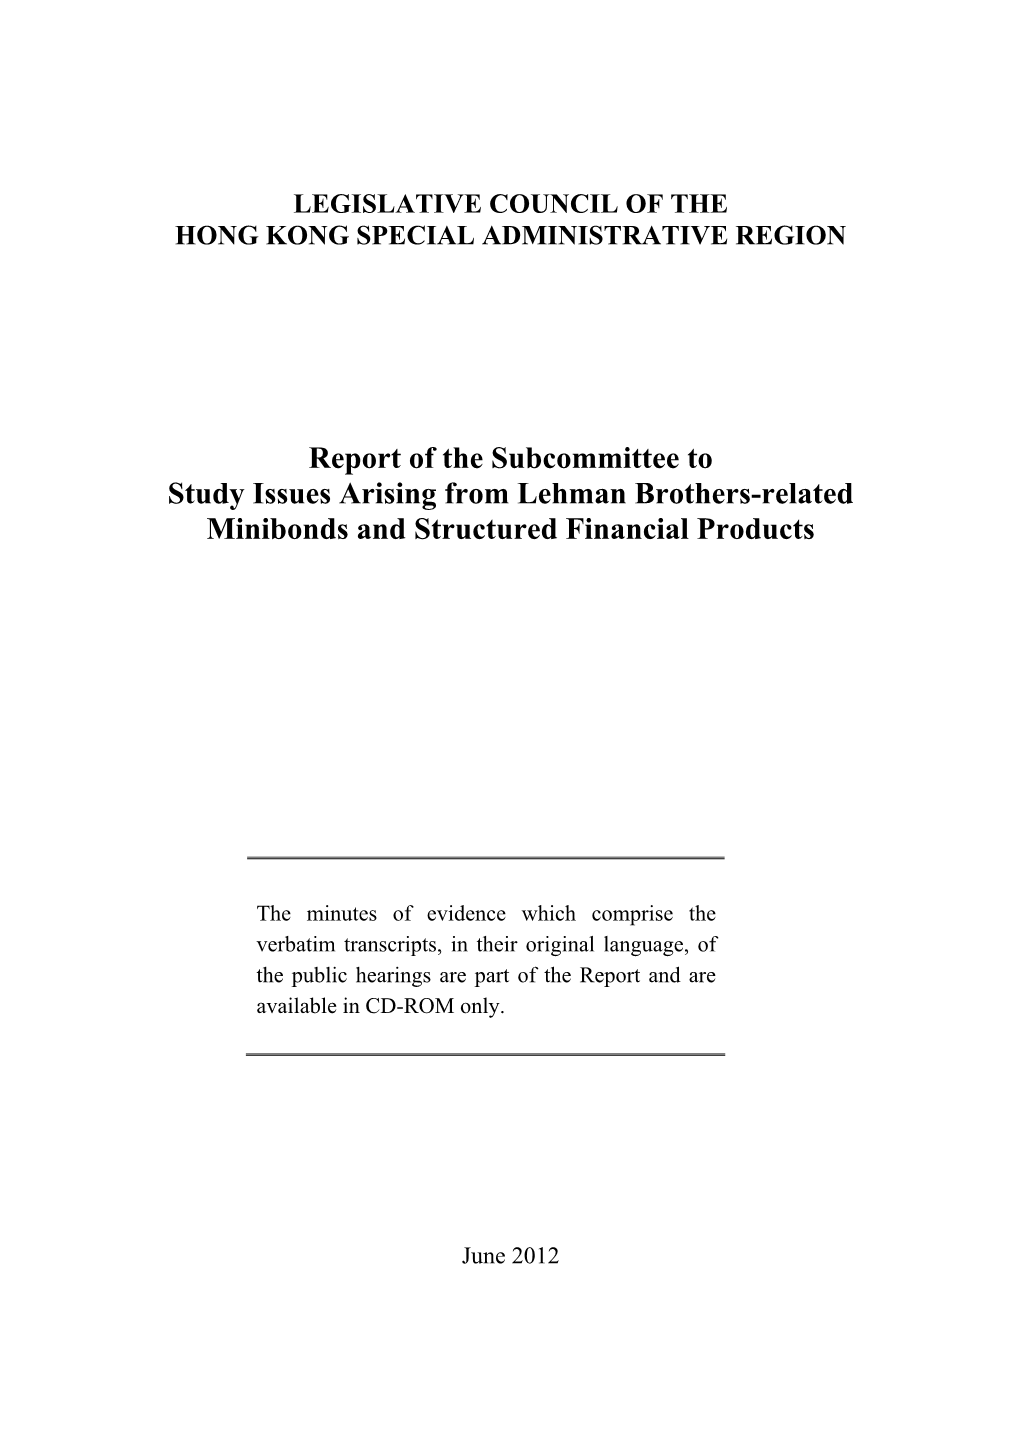 Report of the Subcommittee to Study Issues Arising from Lehman Brothers-Related Minibonds and Structured Financial Products